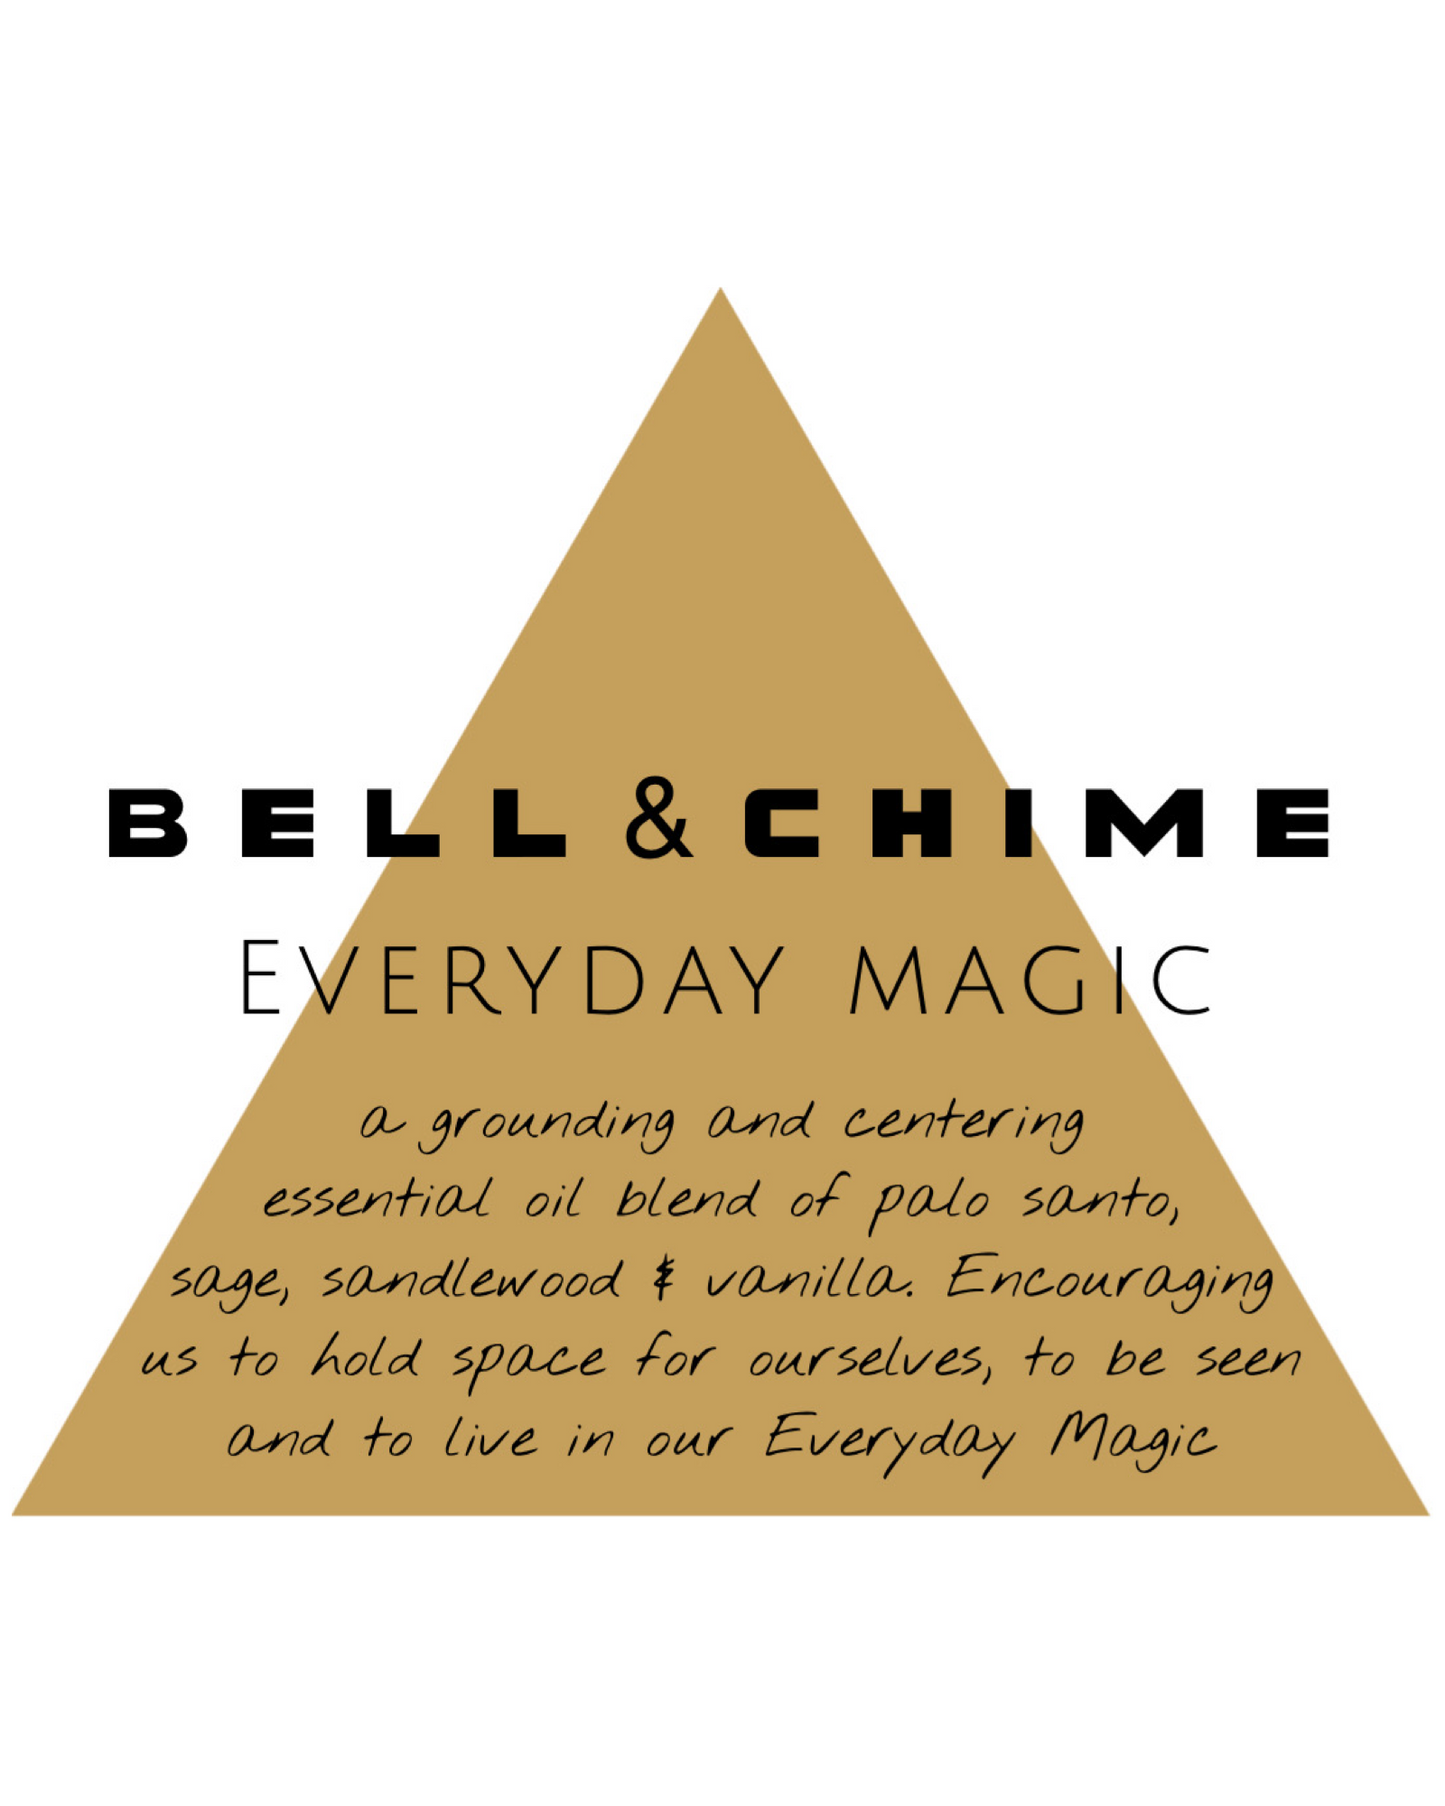 Bell & Chime "Everyday Magic" a grounding and centering essential oil blend of palo Santo, sage, sandalwood and vanilla. Encouraging us to hold space for ourselves, to be seen and to live in our Everyday Magic.